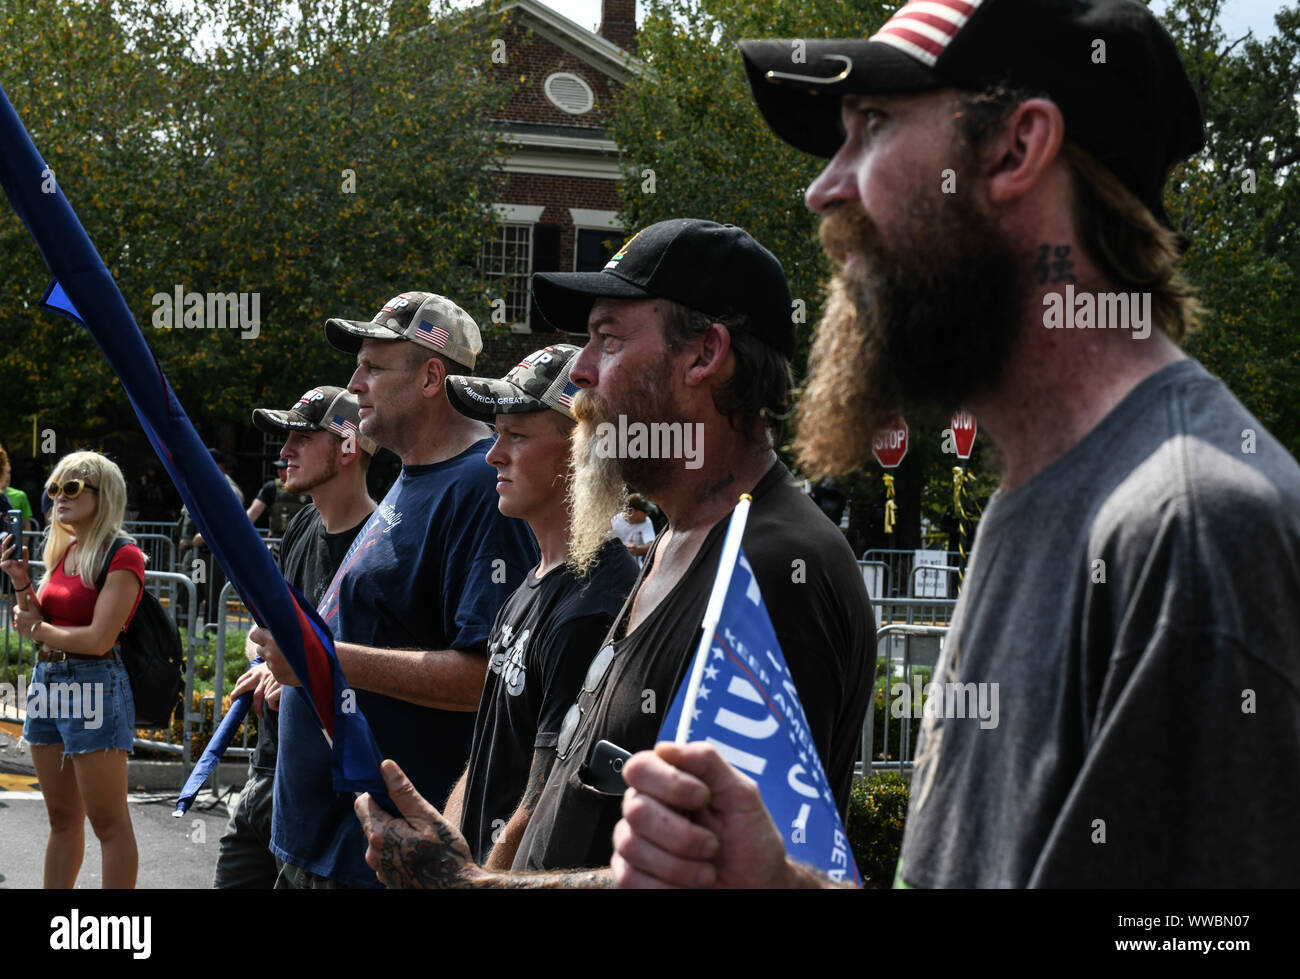 Dahlonega, Georgia, USA. 14th Sep, 2019. Trump supporters joined longtime white nationalist leader Chester Doles in what Doles billed as 'American Patriot Rally'' to honor President Trump in Dahlonega, Georgia on Saturday. All told, around 50 people joined Doles' rally, while around 100 people''”including members of the so-called 'Antifa'' movement''”turned out to protest the event, which drew hundreds of law enforcement officers from surrounding counties. Credit: Miguel Juarez Lugo/ZUMA Wire/Alamy Live News Stock Photo